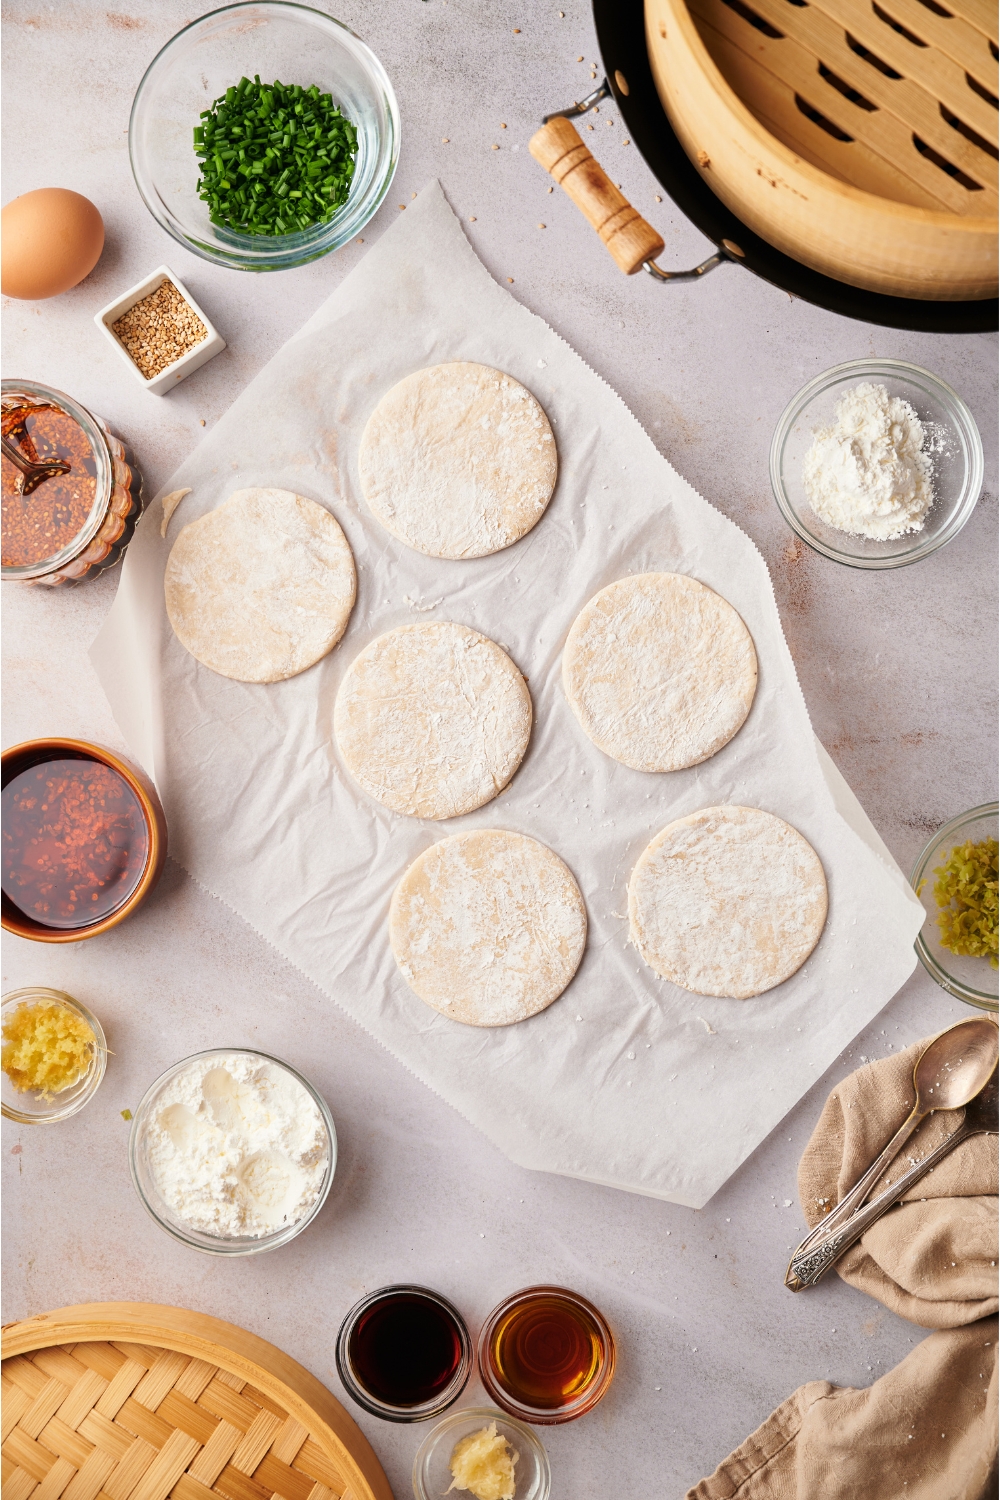 Six dough discs on a piece of white parchment paper, surrounded by an assortment of ingredients including bowls of oil, soy sauce and various dry ingredients.